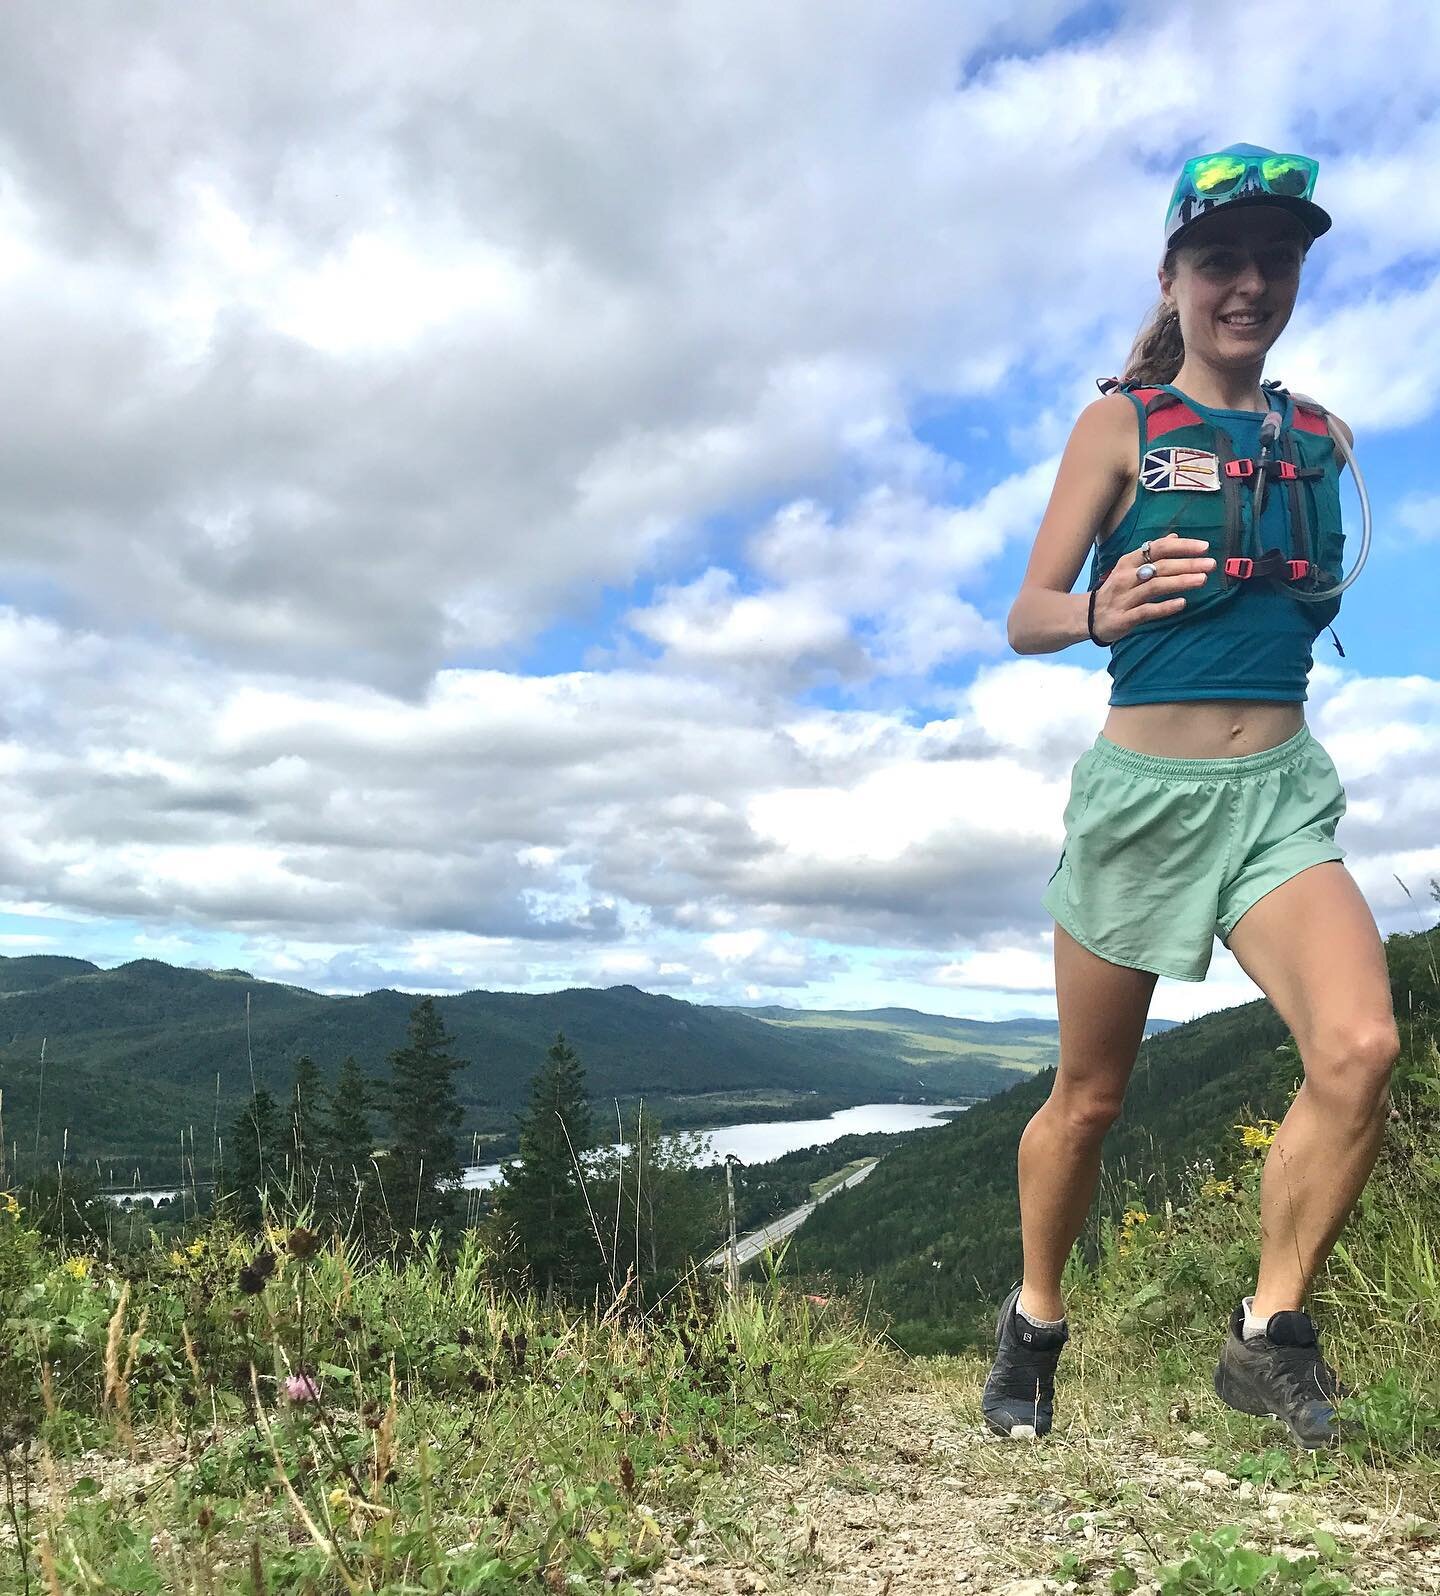 I&rsquo;ve been home training on the beautiful mountains on the west coast of Newfoundland this month to prepare for my next big adventure: the @grandraidreunion Diagonale des Fous on R&eacute;union Island! 

Thanks to a partnership between the Grand